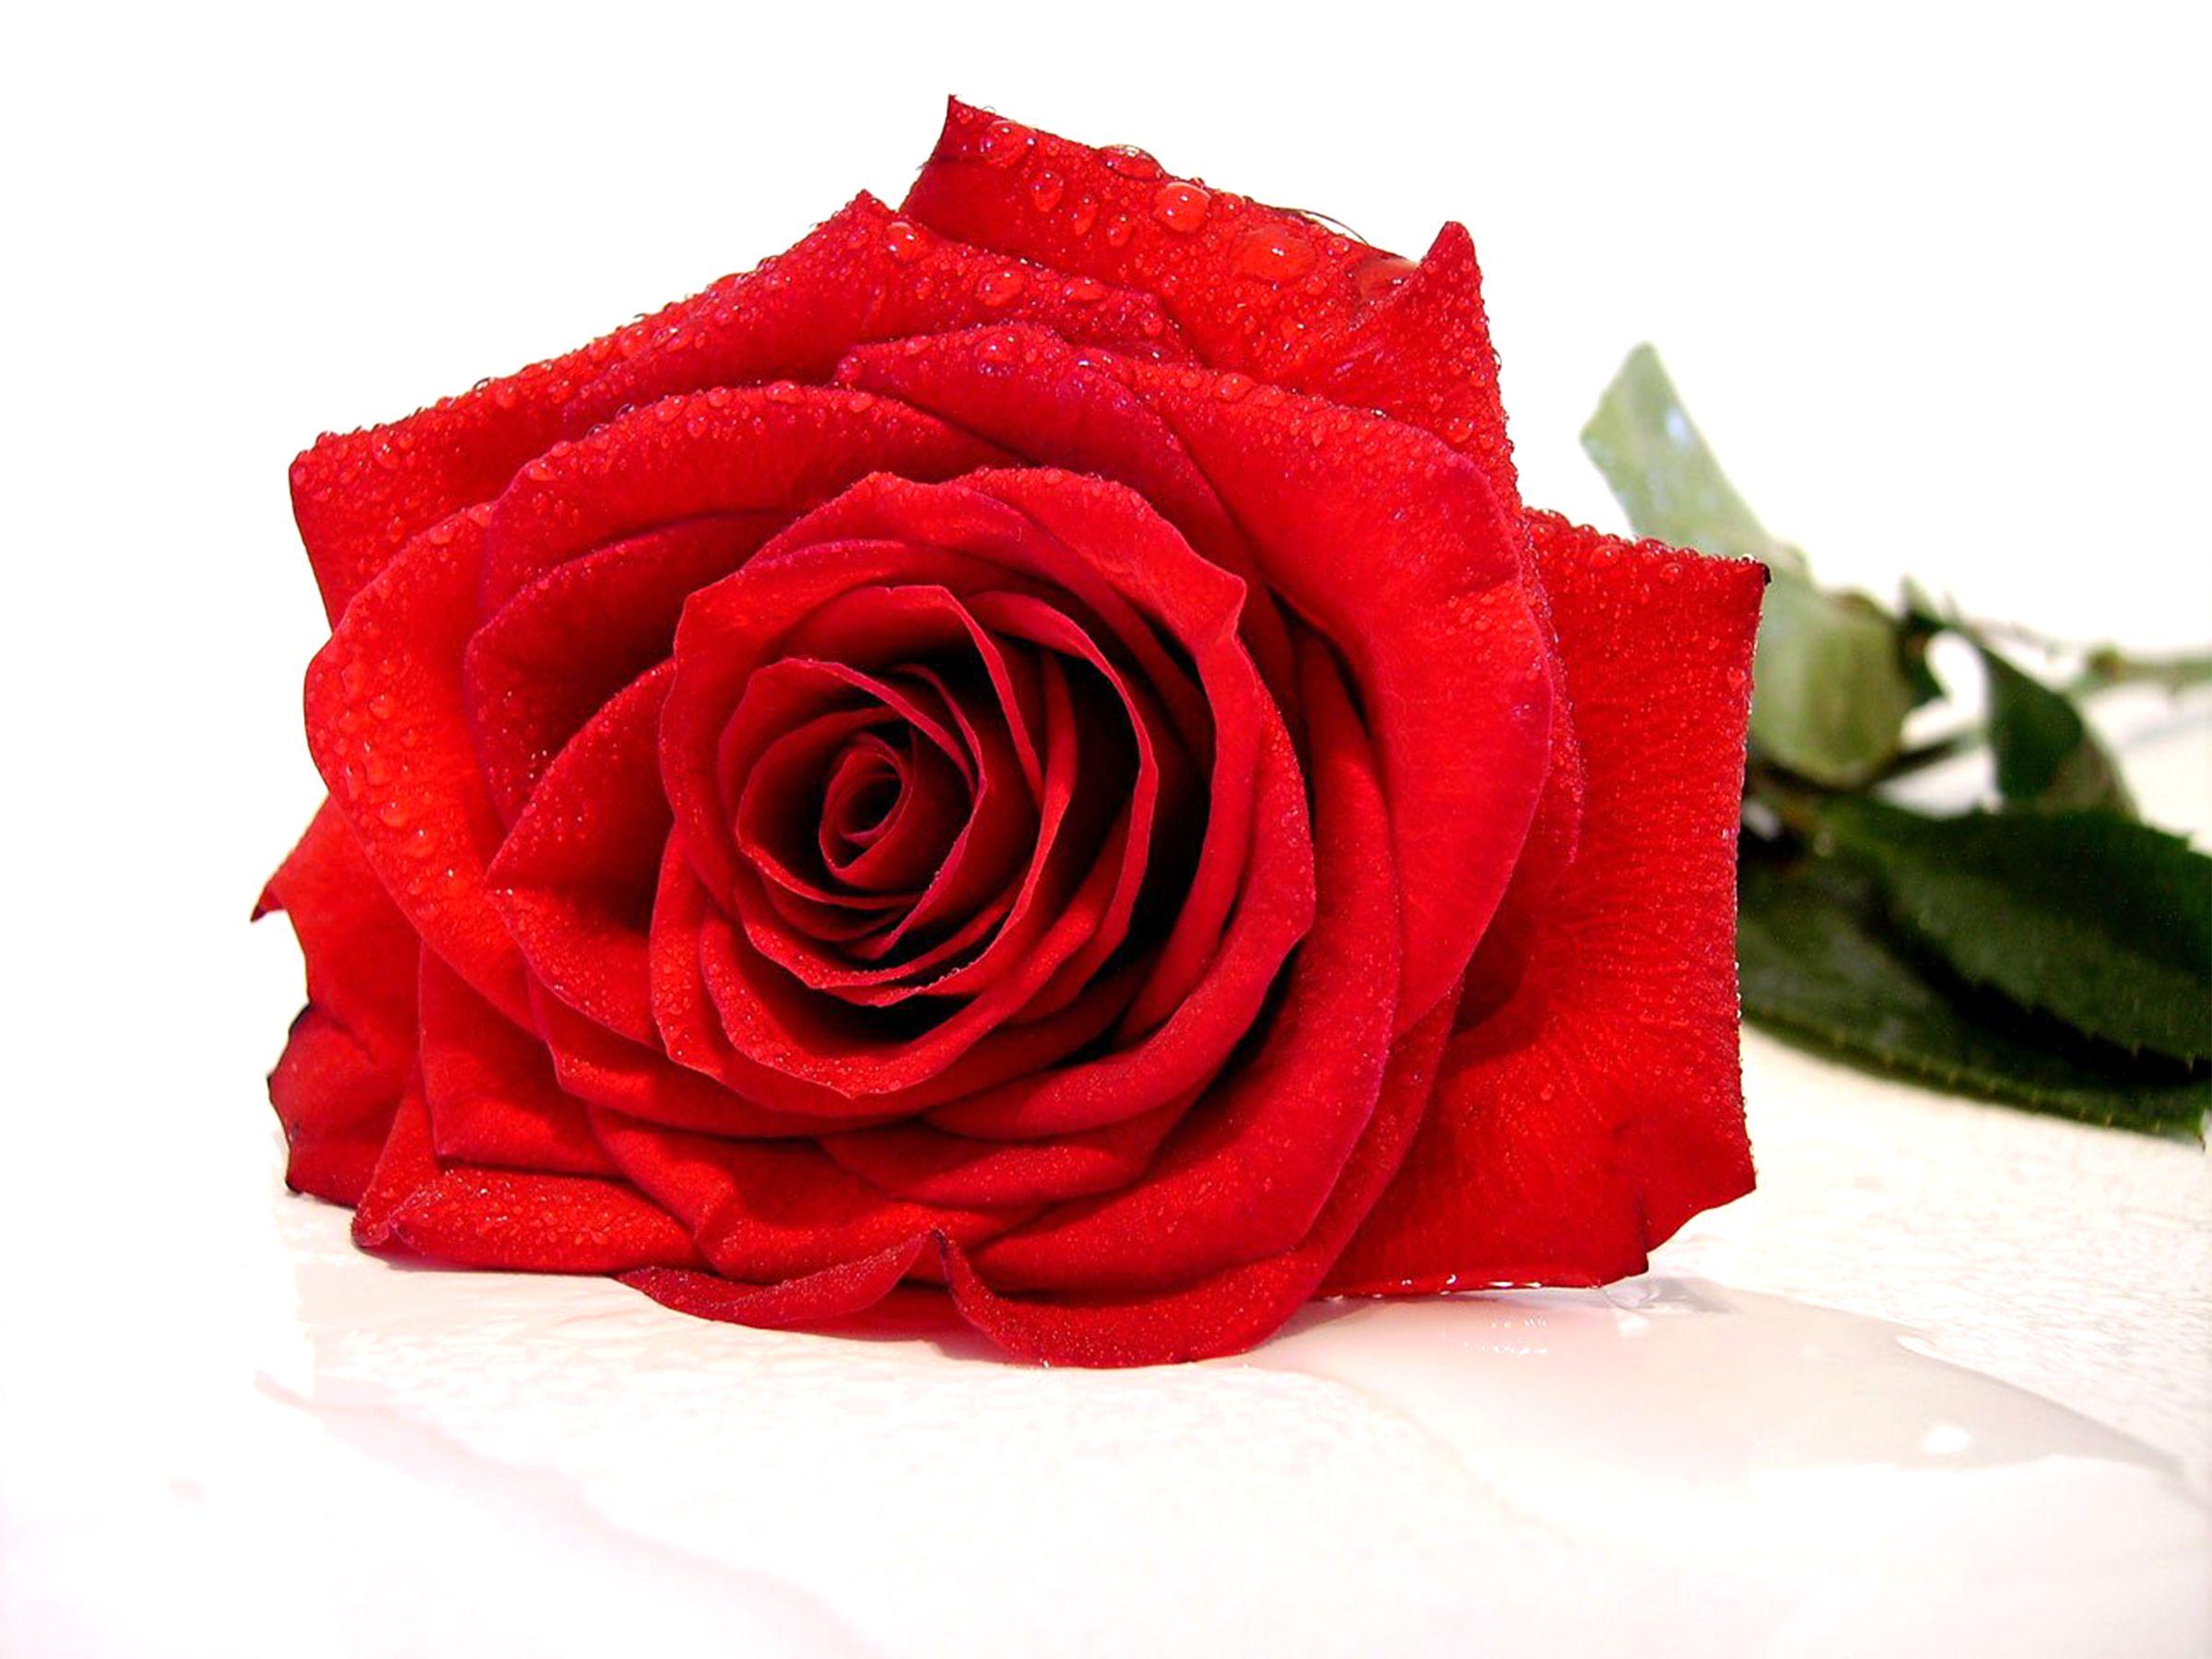 Photos For Background Litecom HD Desktop Colorful On Cute Red Roses